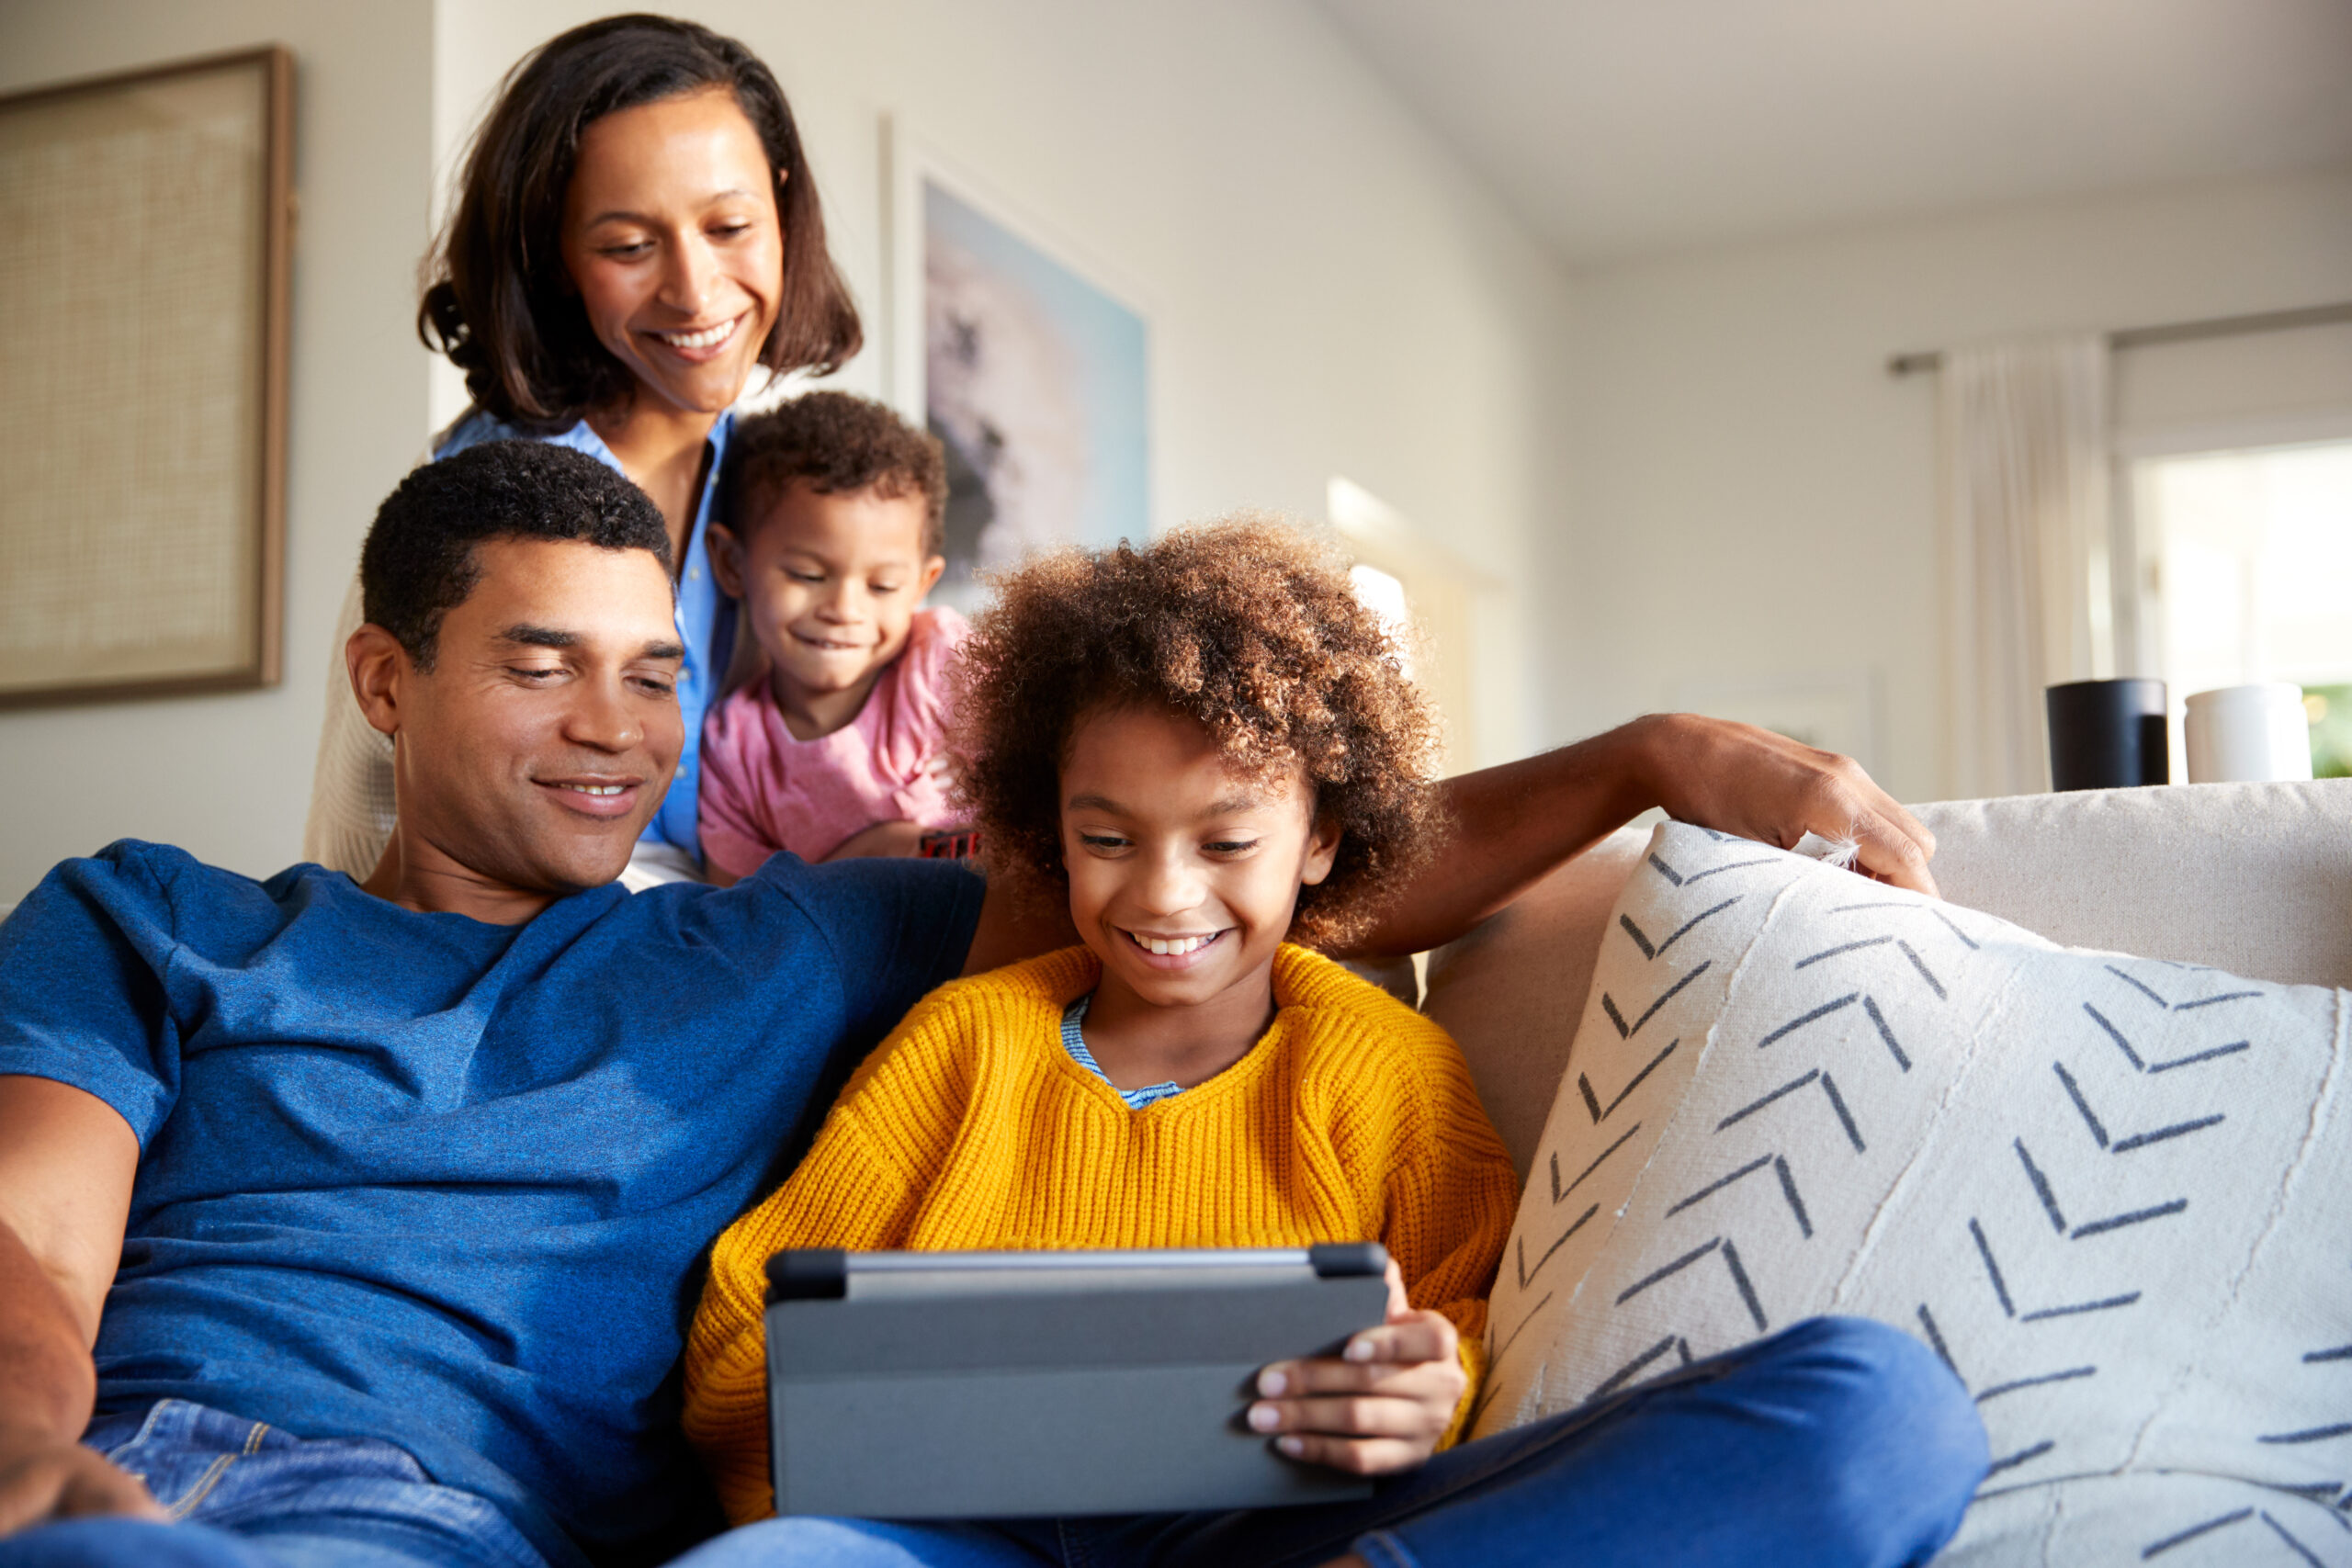 Young family spending time together using a tablet computer in their living room, front view